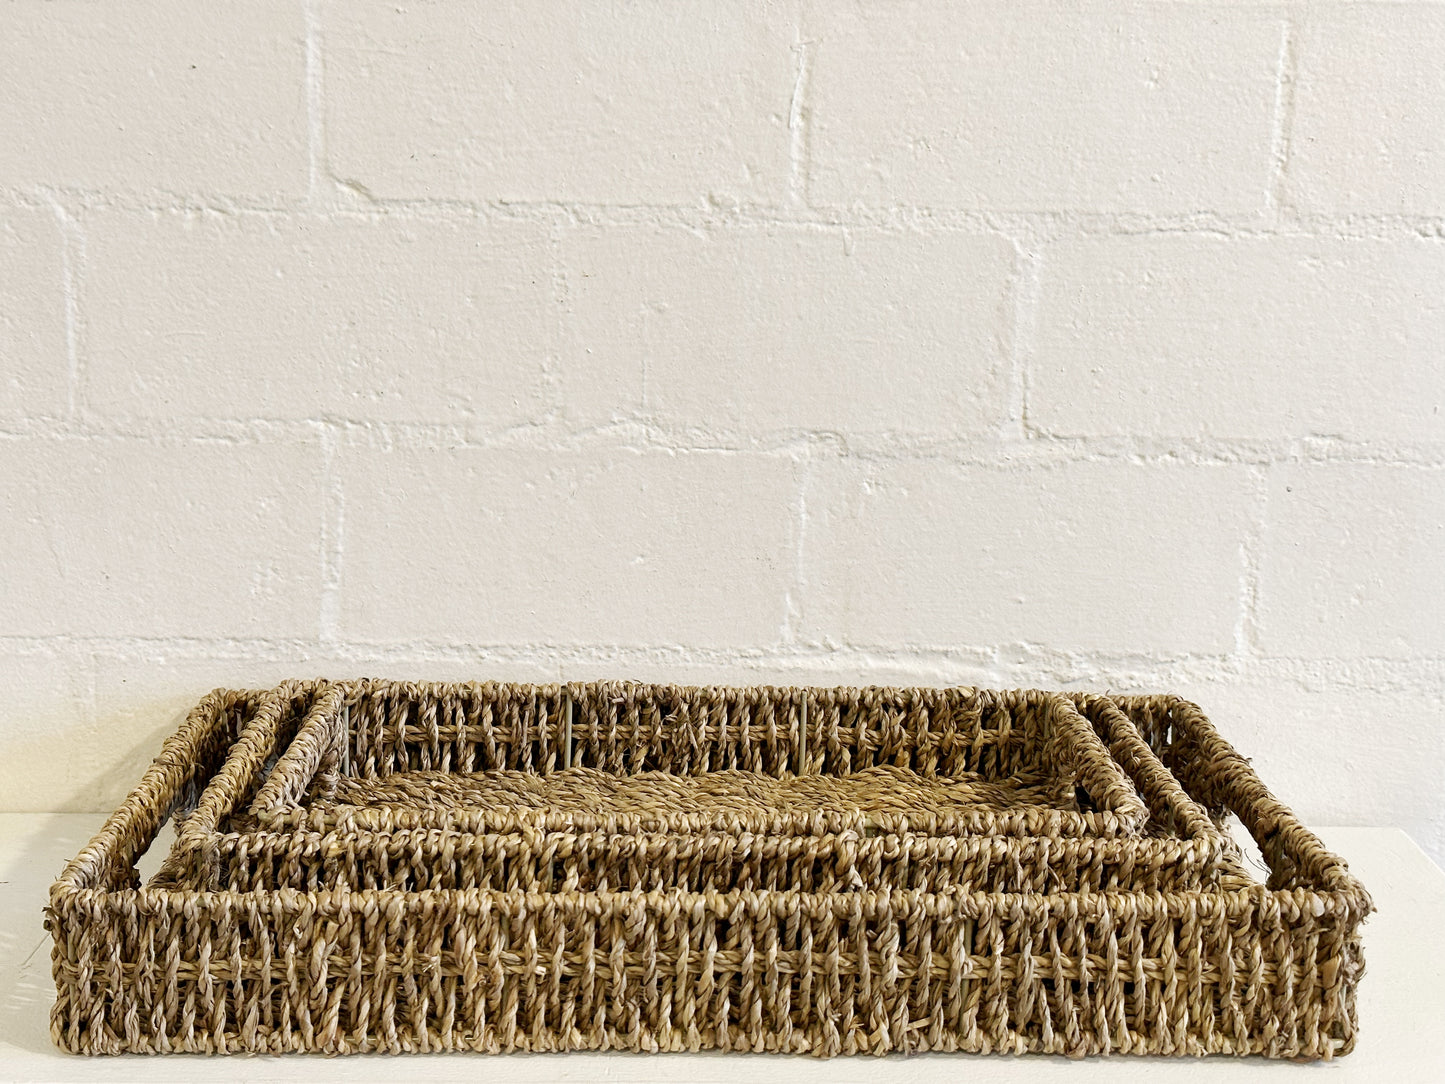 SEAGRASS BASKET TRAY